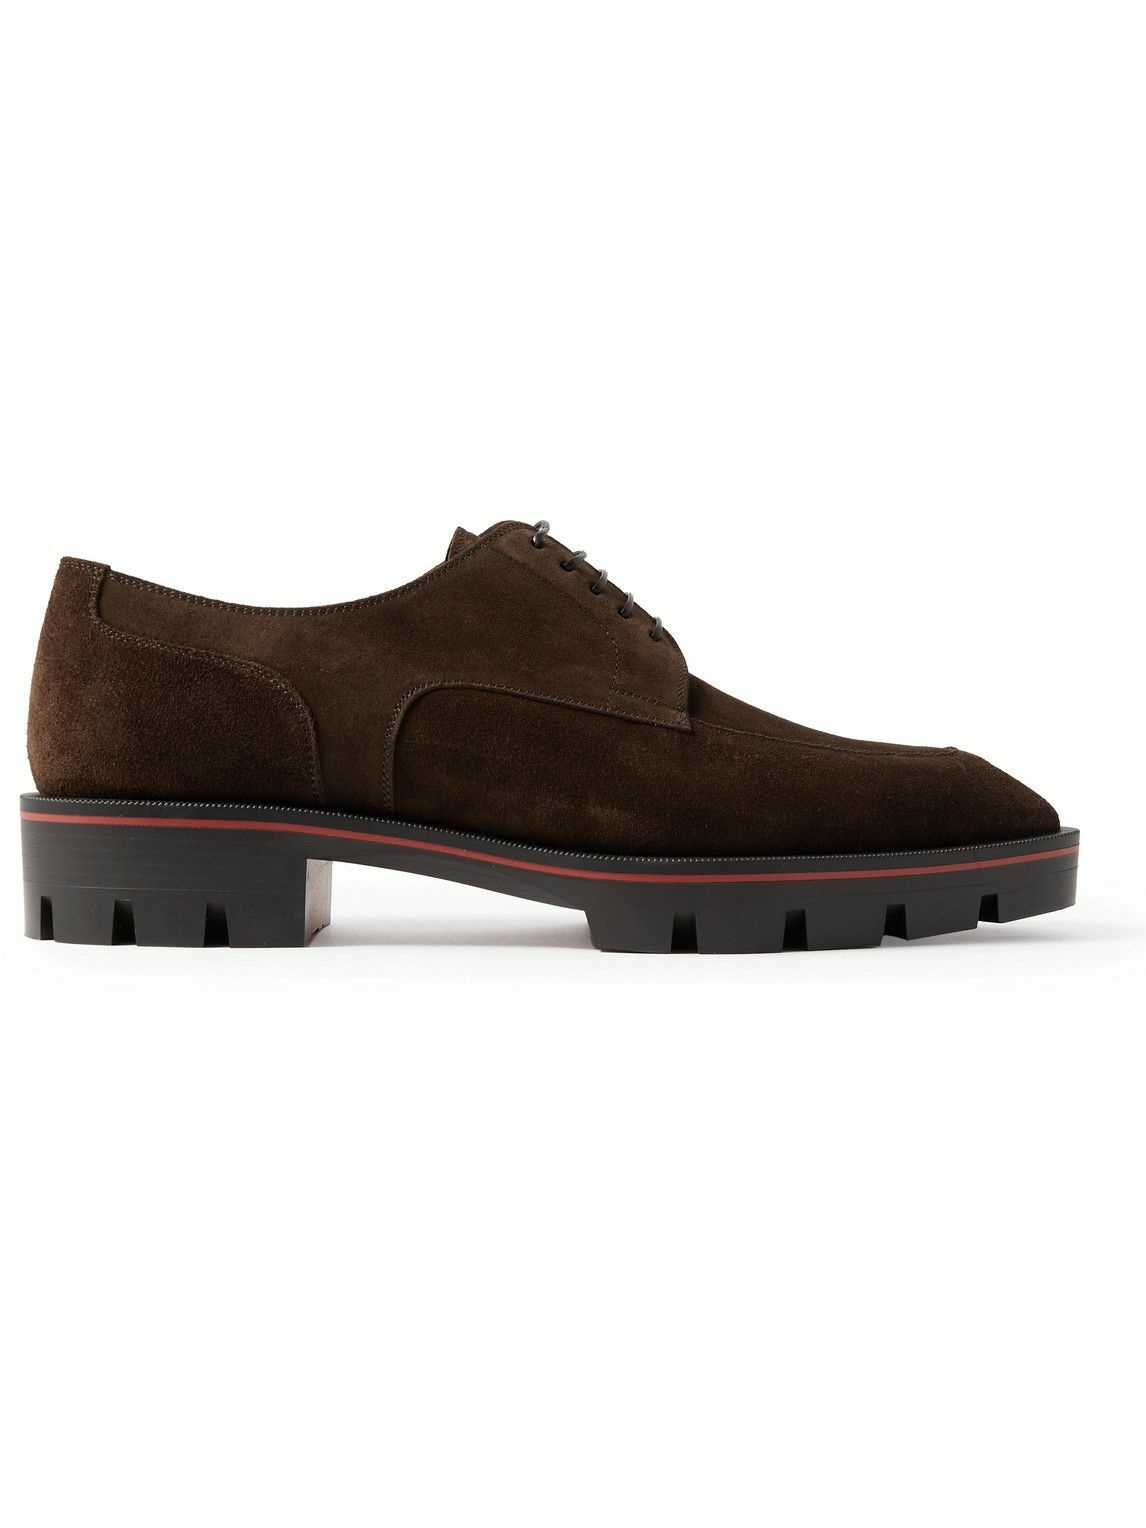 Photo: Christian Louboutin - Davisol Suede Derby Shoes - Brown